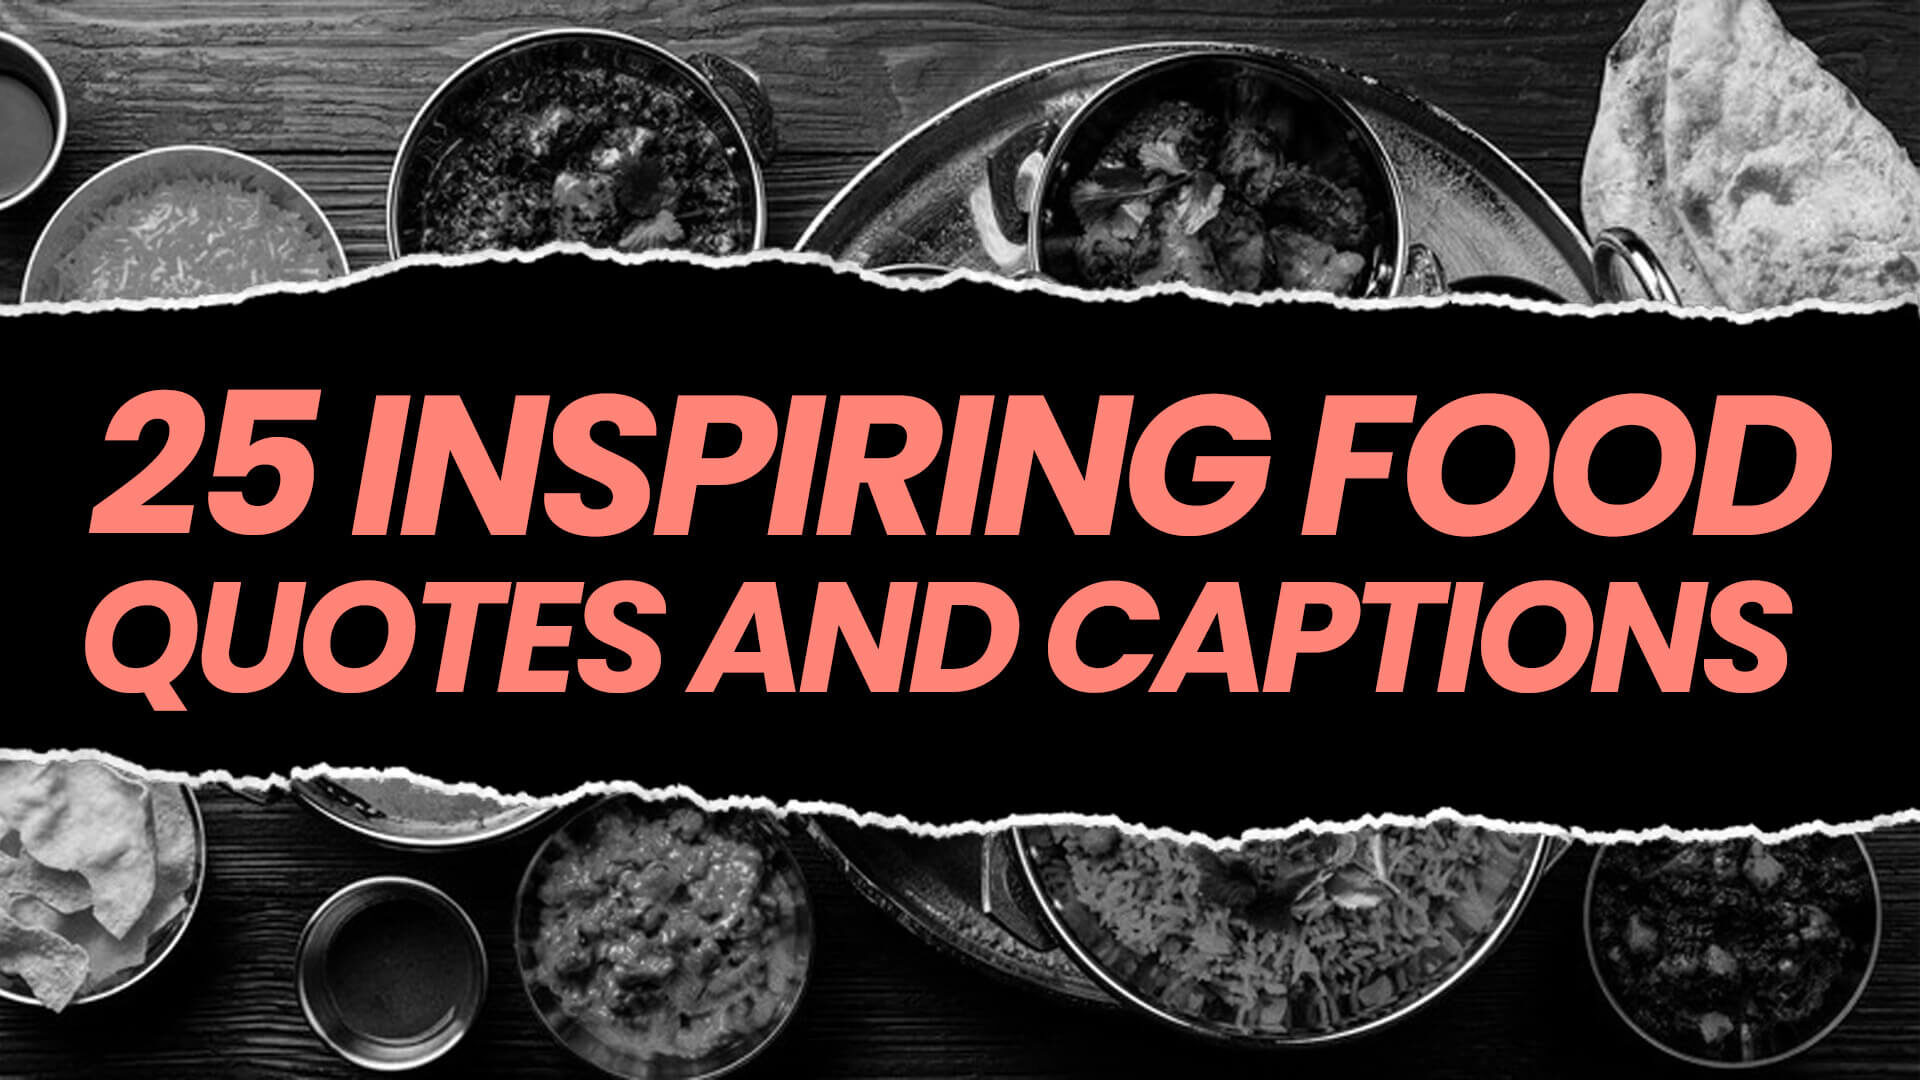 25 Inspiring Food Quotes and Captions to Make Your Restaurant Go Viral